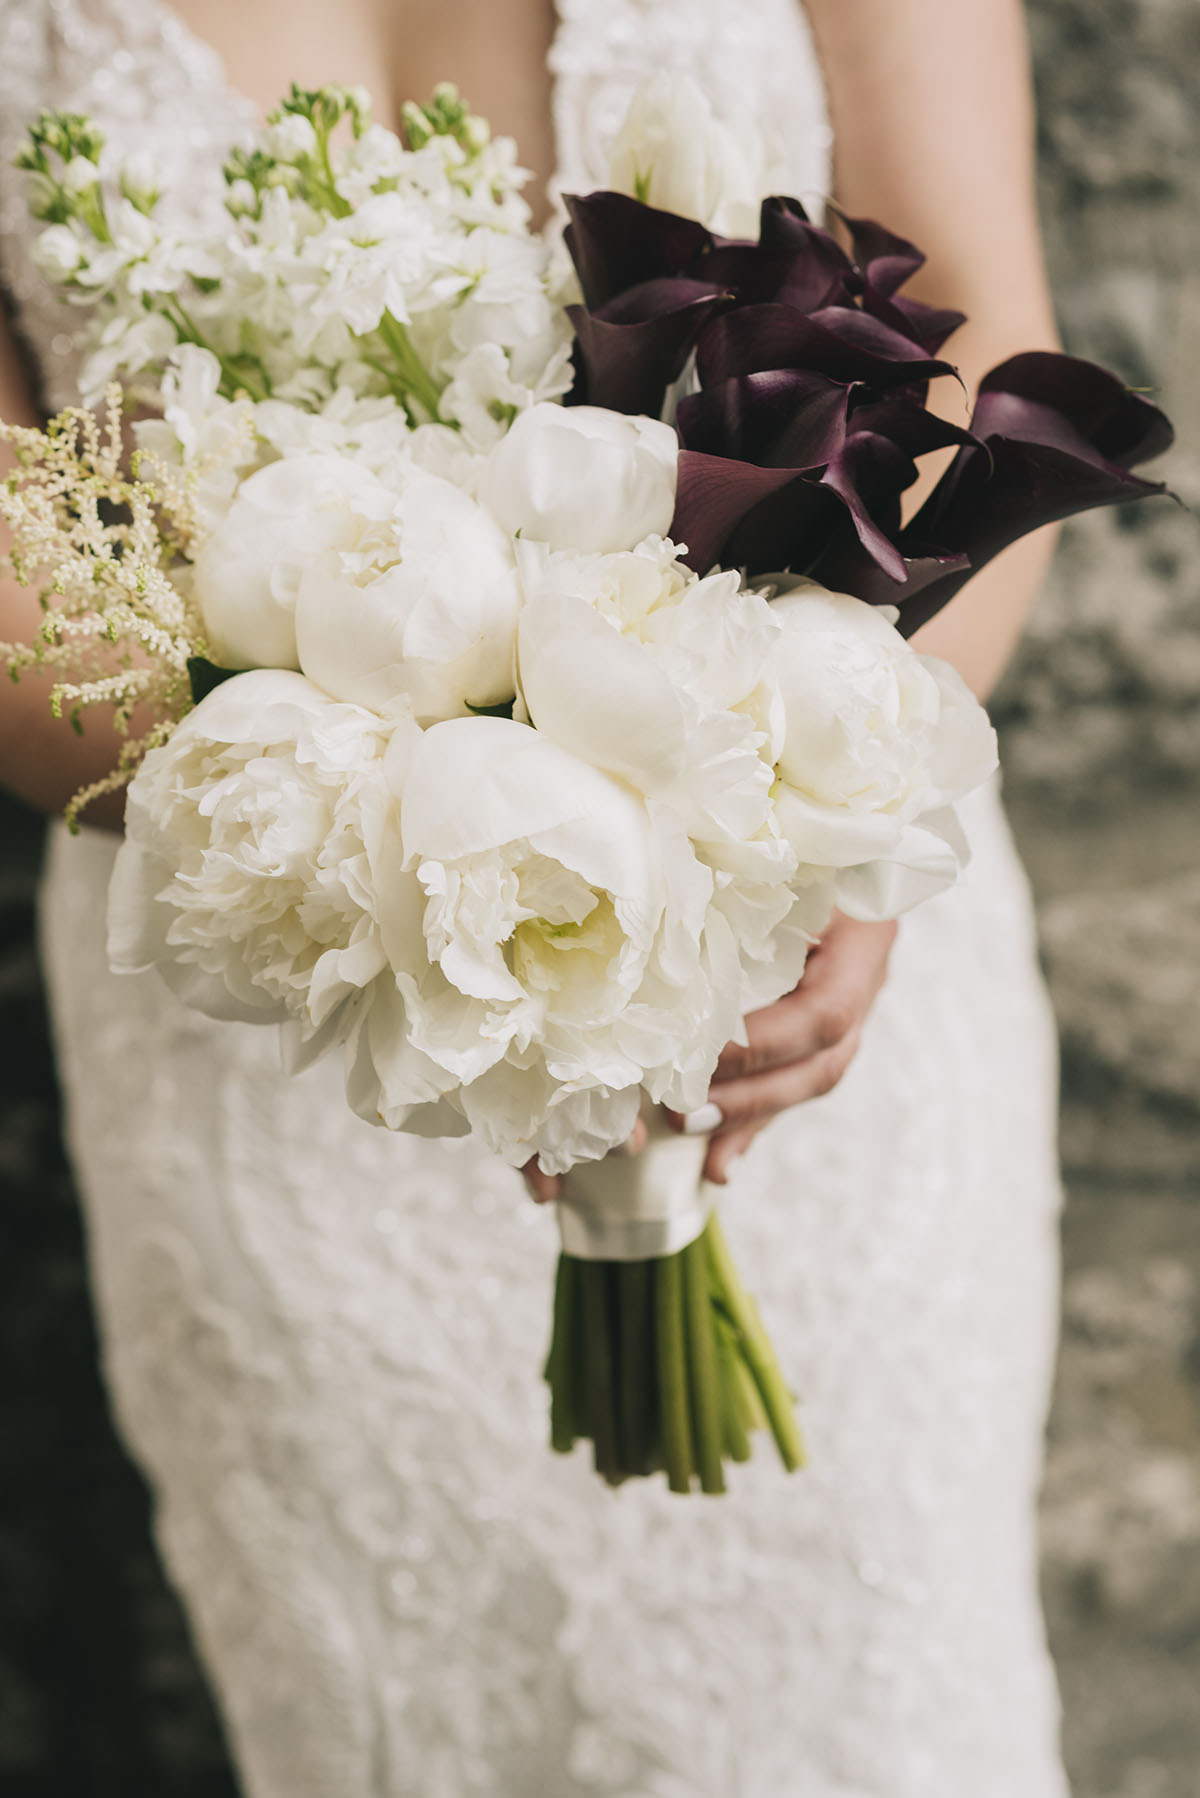 Montreal destination wedding with industrial chic theme flowers